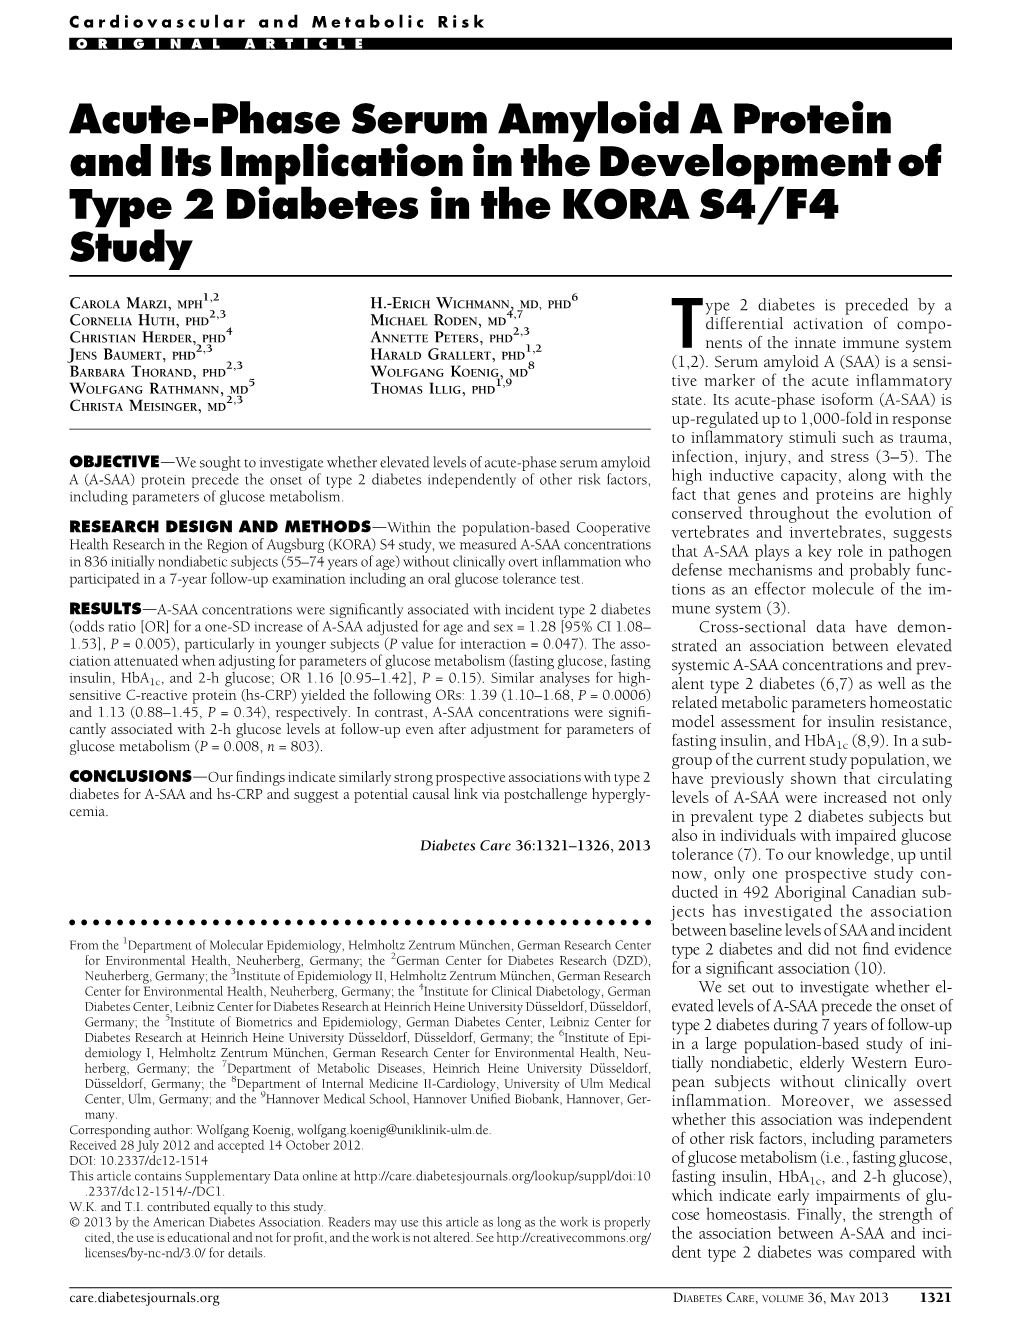 Acute-Phase Serum Amyloid a Protein and Its Implication in the Development of Type 2 Diabetes in the KORA S4/F4 Study